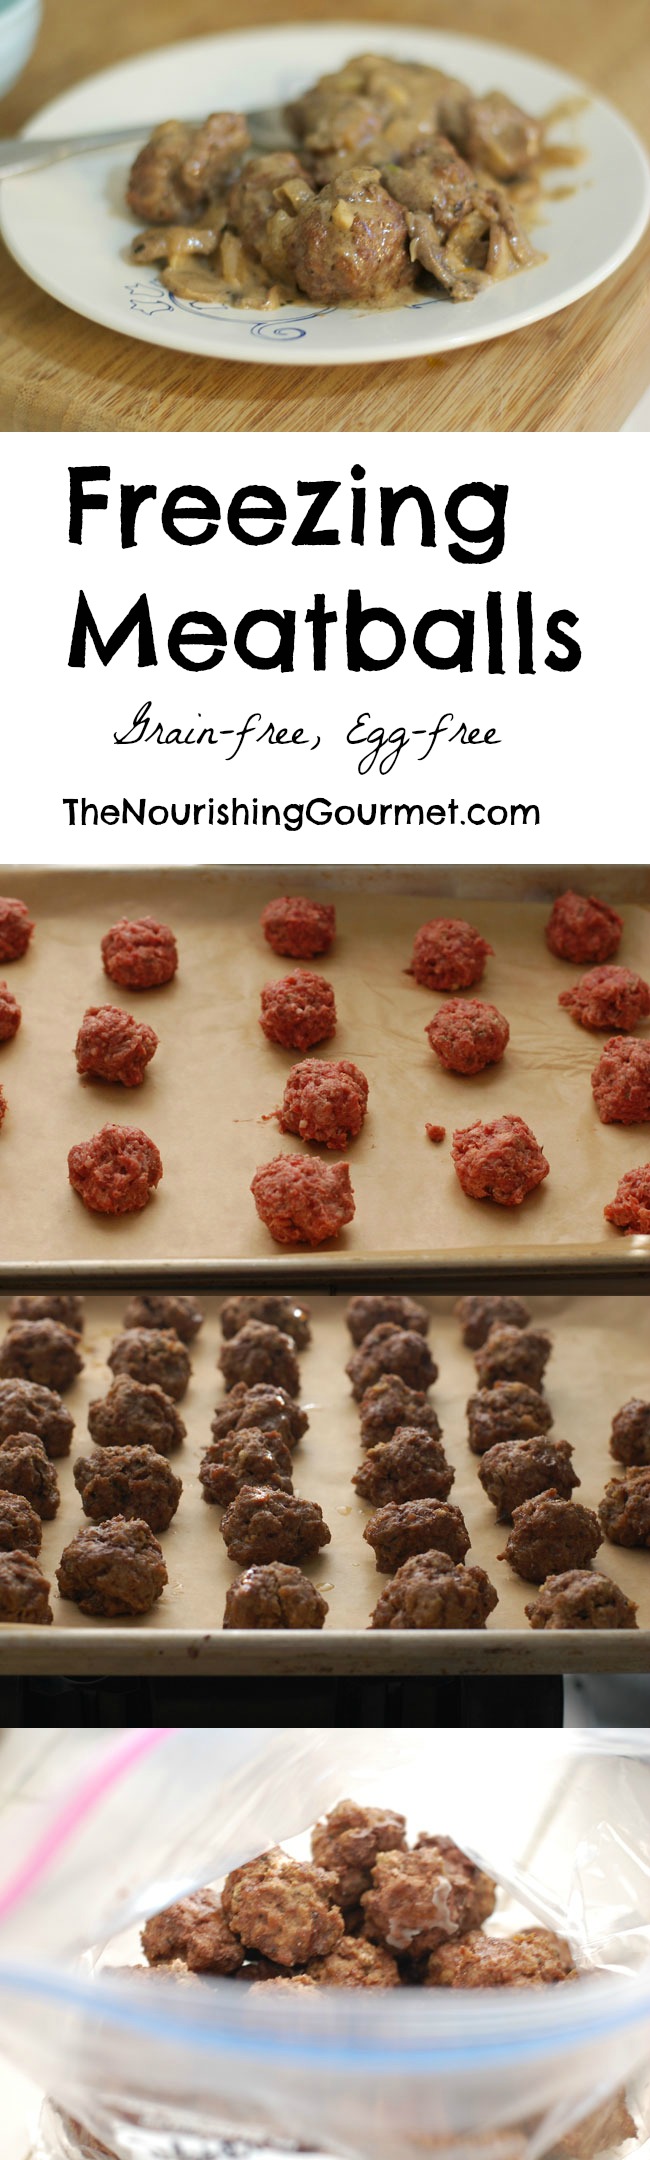 Follow this simple method to make your own freezer meatballs! You can take out as many as you like at a time. You can use your favorite recipe, or you can use this grain-free, egg-free Italian Meatball recipe. Yum! 